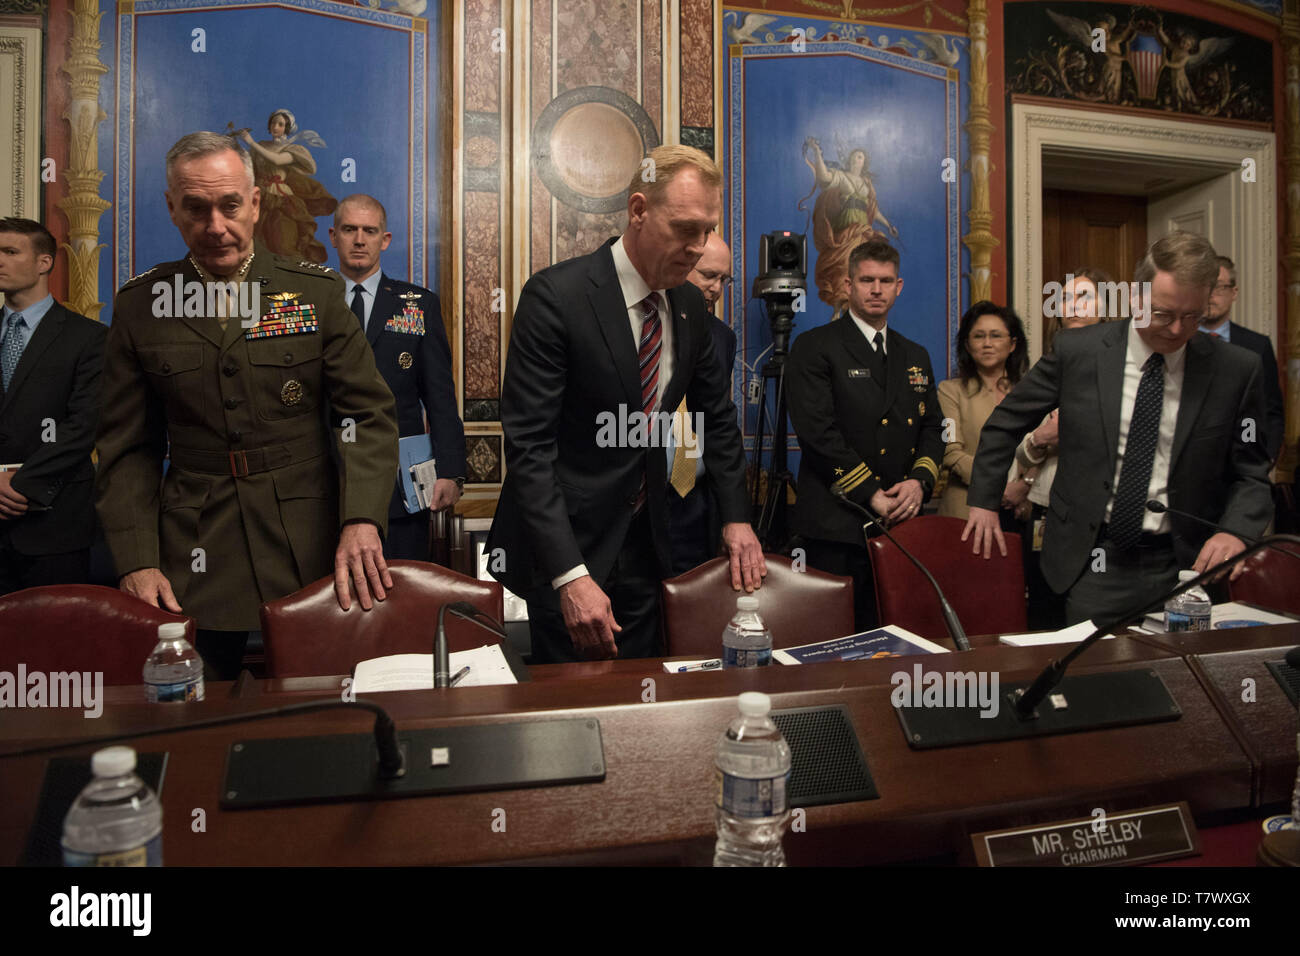 From left, the chairman of the Joint Chiefs of Staff, Marine Corps Gen. Joseph F. Dunford Jr., U.S. Acting Secretary of Defense Patrick M. Shanahan, and Under Secretary of Defense (Comptroller) / Chief Financial Officer David L. Norquist appear before the Senate Appropriations Defense Subcommittee for a defense budget hearing, Washington, D.C., May 8, 2019. (DoD photo by Lisa Ferdinando) Stock Photo